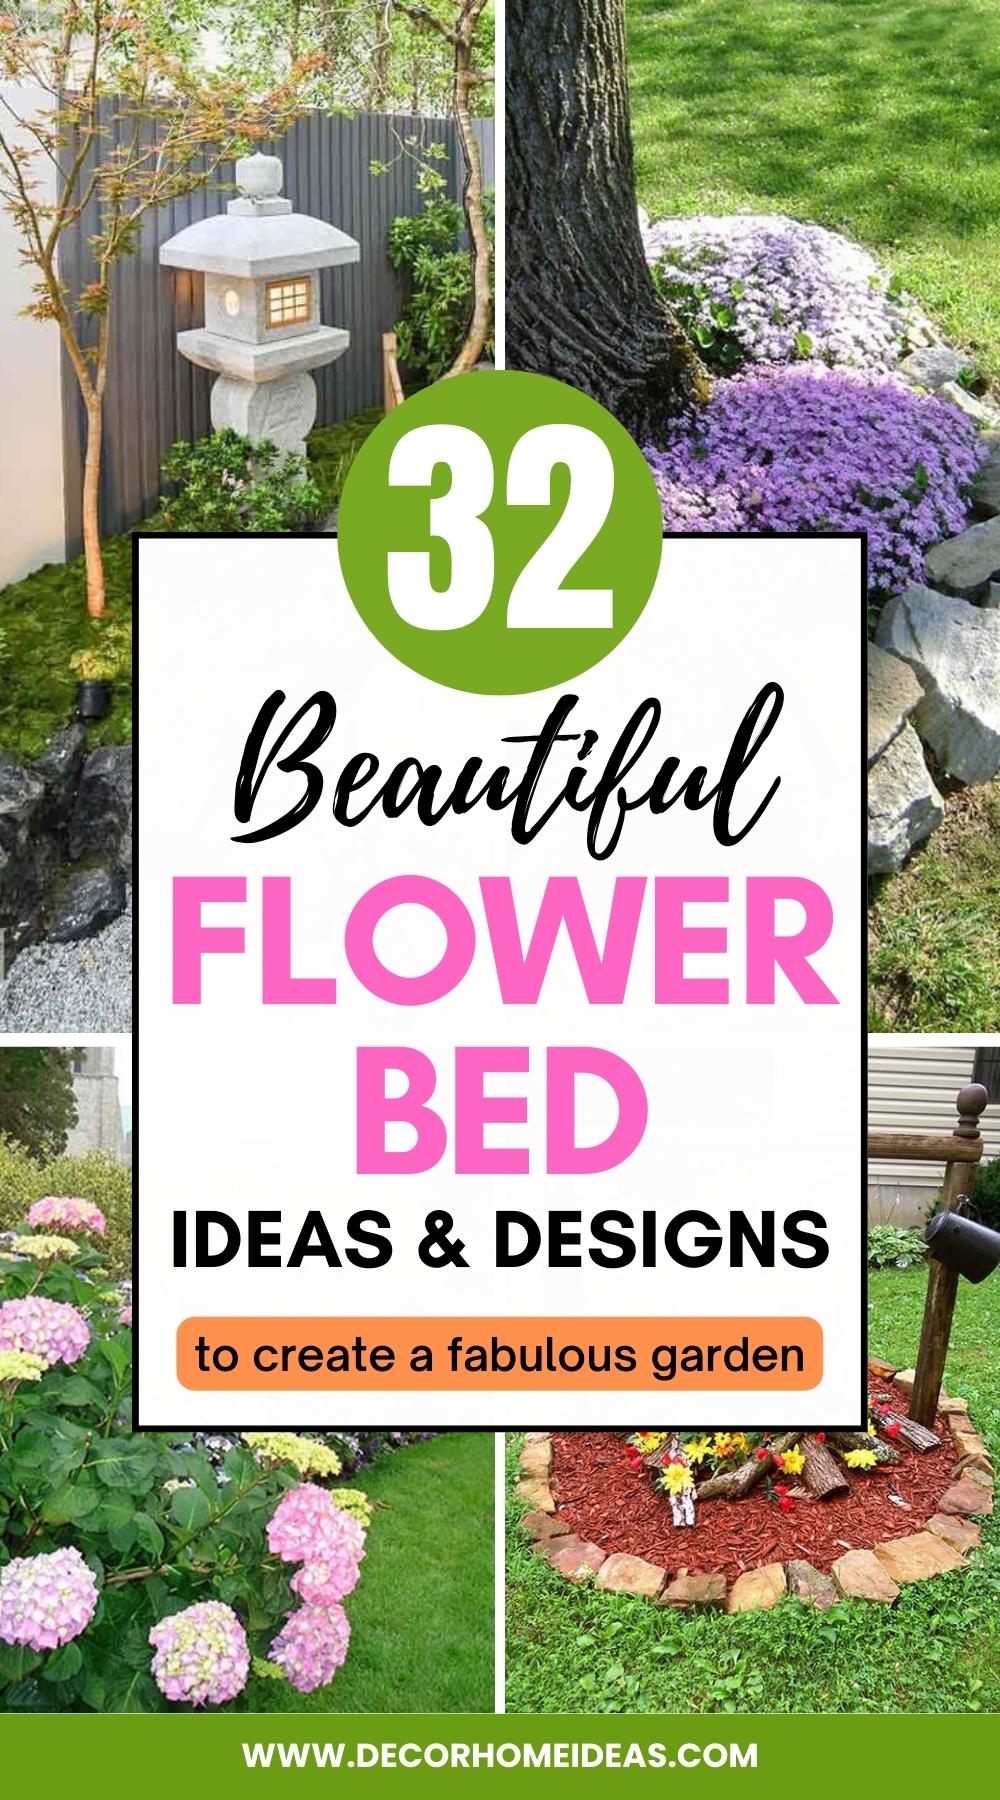 Looking for inspiring flower bed ideas to beautify your garden? Explore these creative and stunning designs featuring a range of colorful flowers and foliage that will add charm and curb appeal to your outdoor space. Discover tips for creating and maintaining gorgeous flower beds that will thrive throughout the seasons.